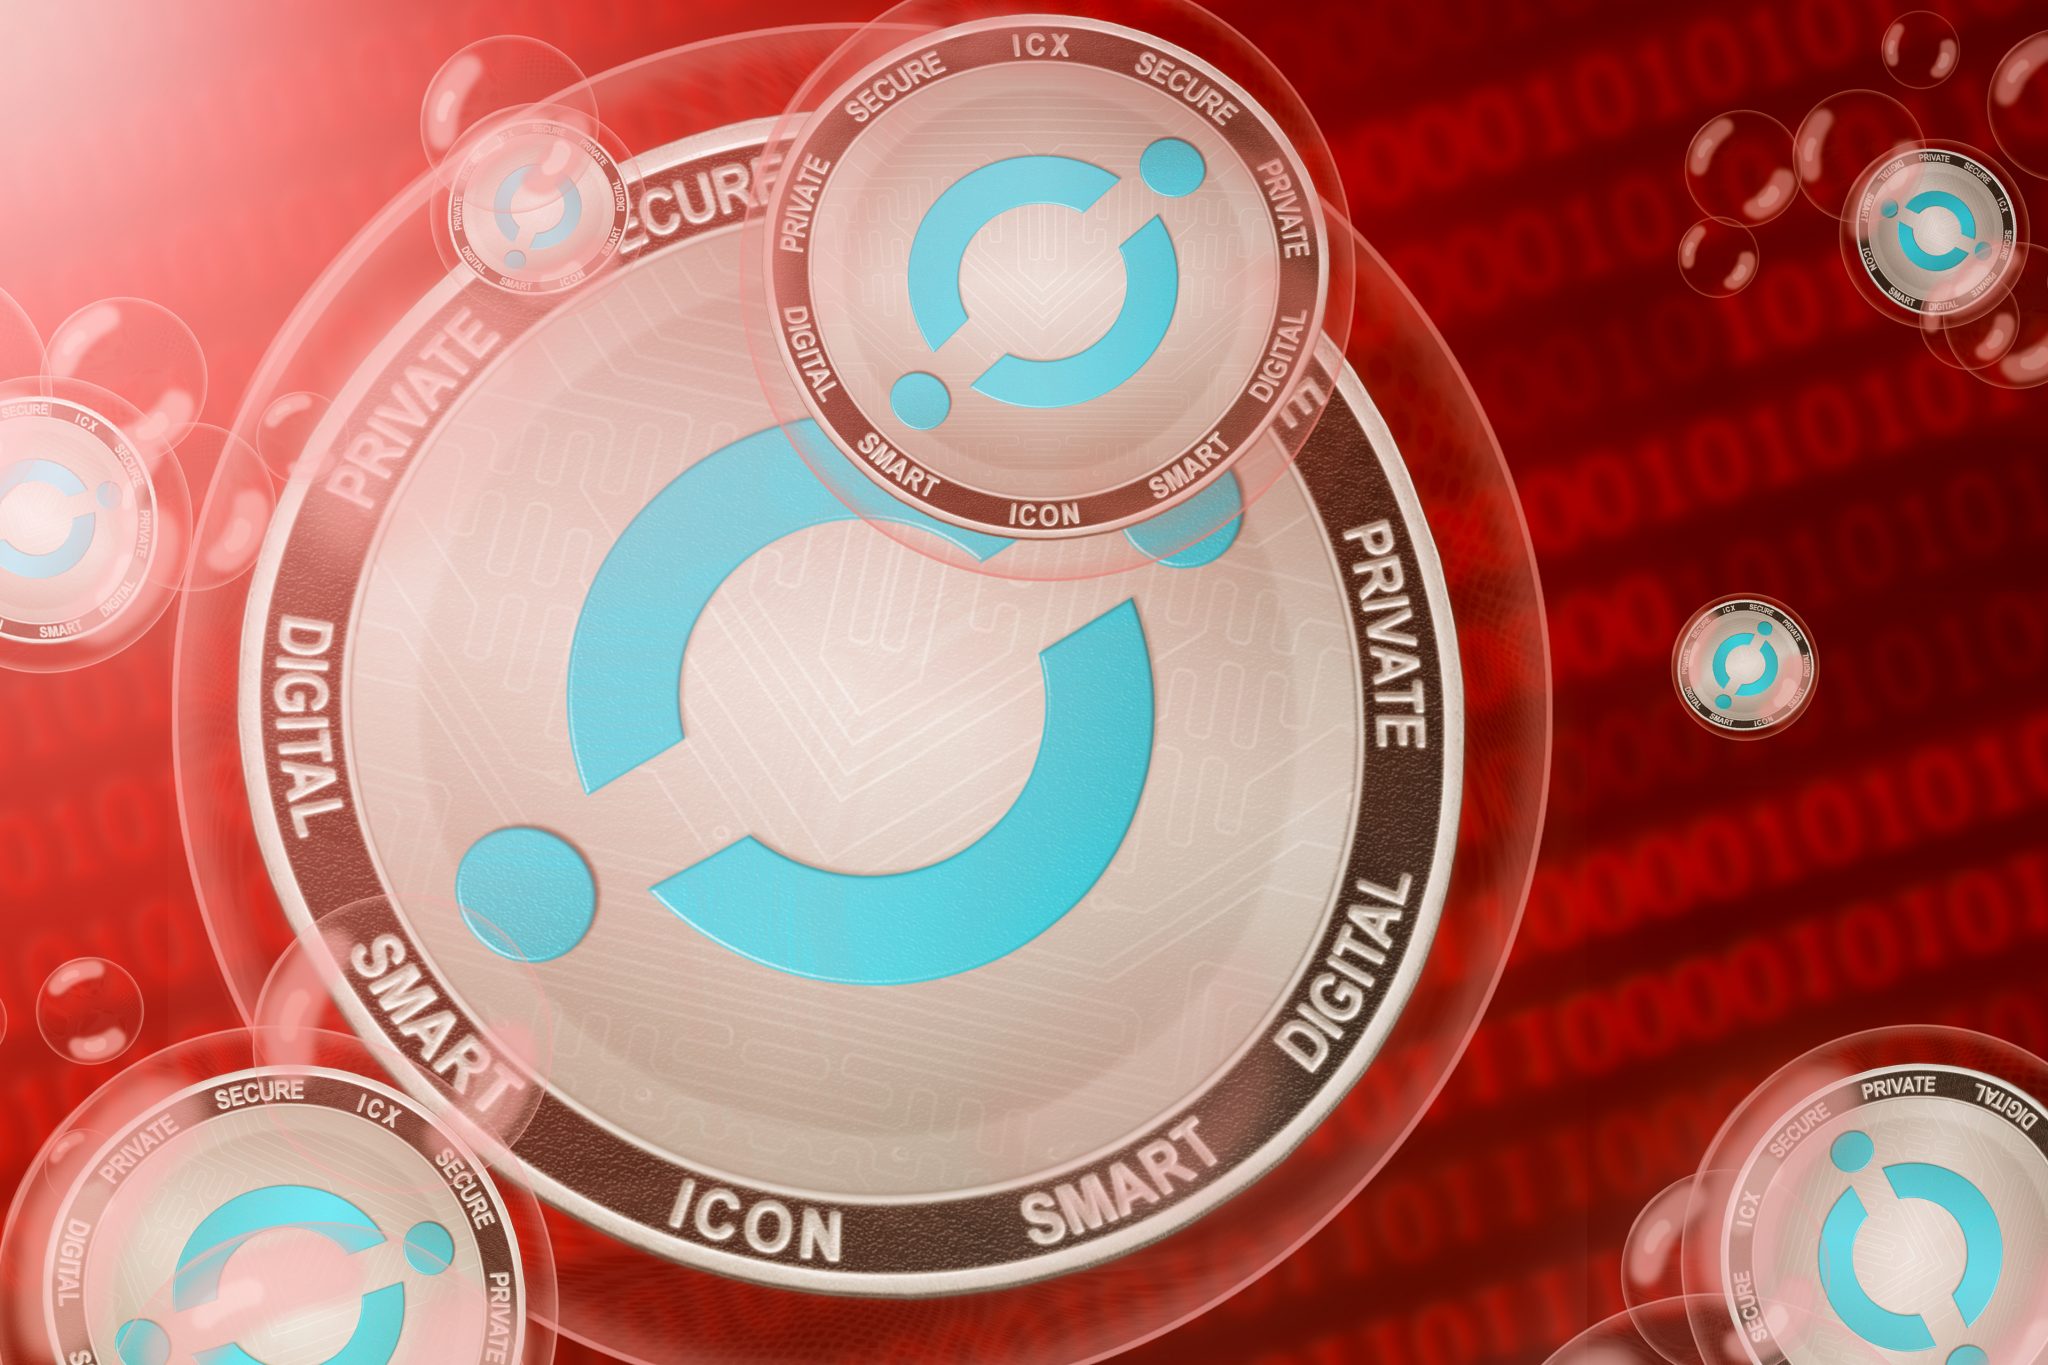 Icon currency crash; ICON (ICX) coins in a bubbles on the binary code background. Close-up